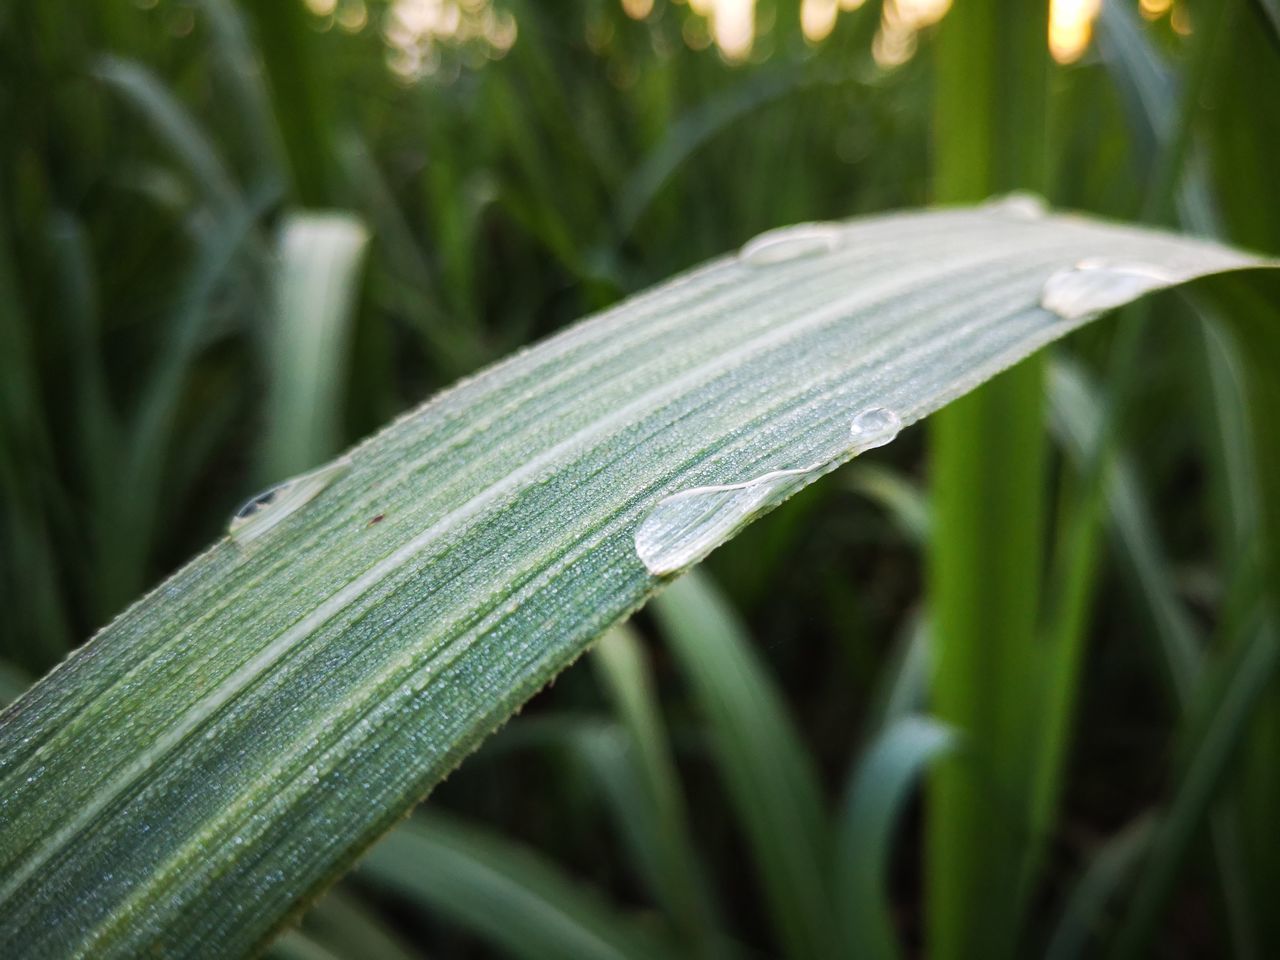 CLOSE-UP OF WET PLANT